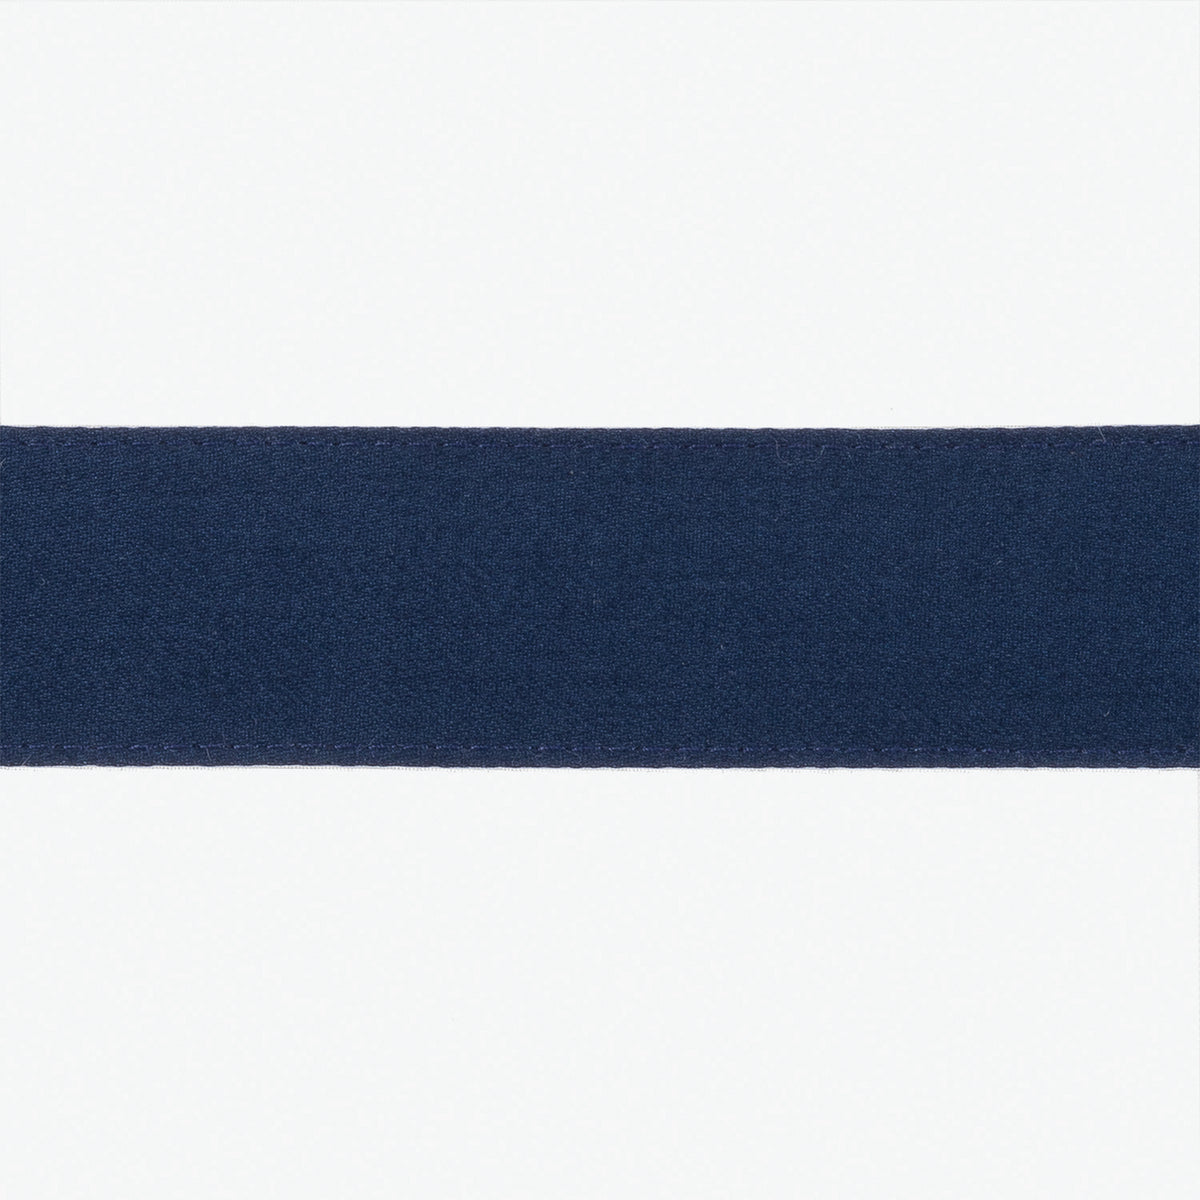 Swatch Sample of Matouk Lowell Tissue Box Cover in Color Navy